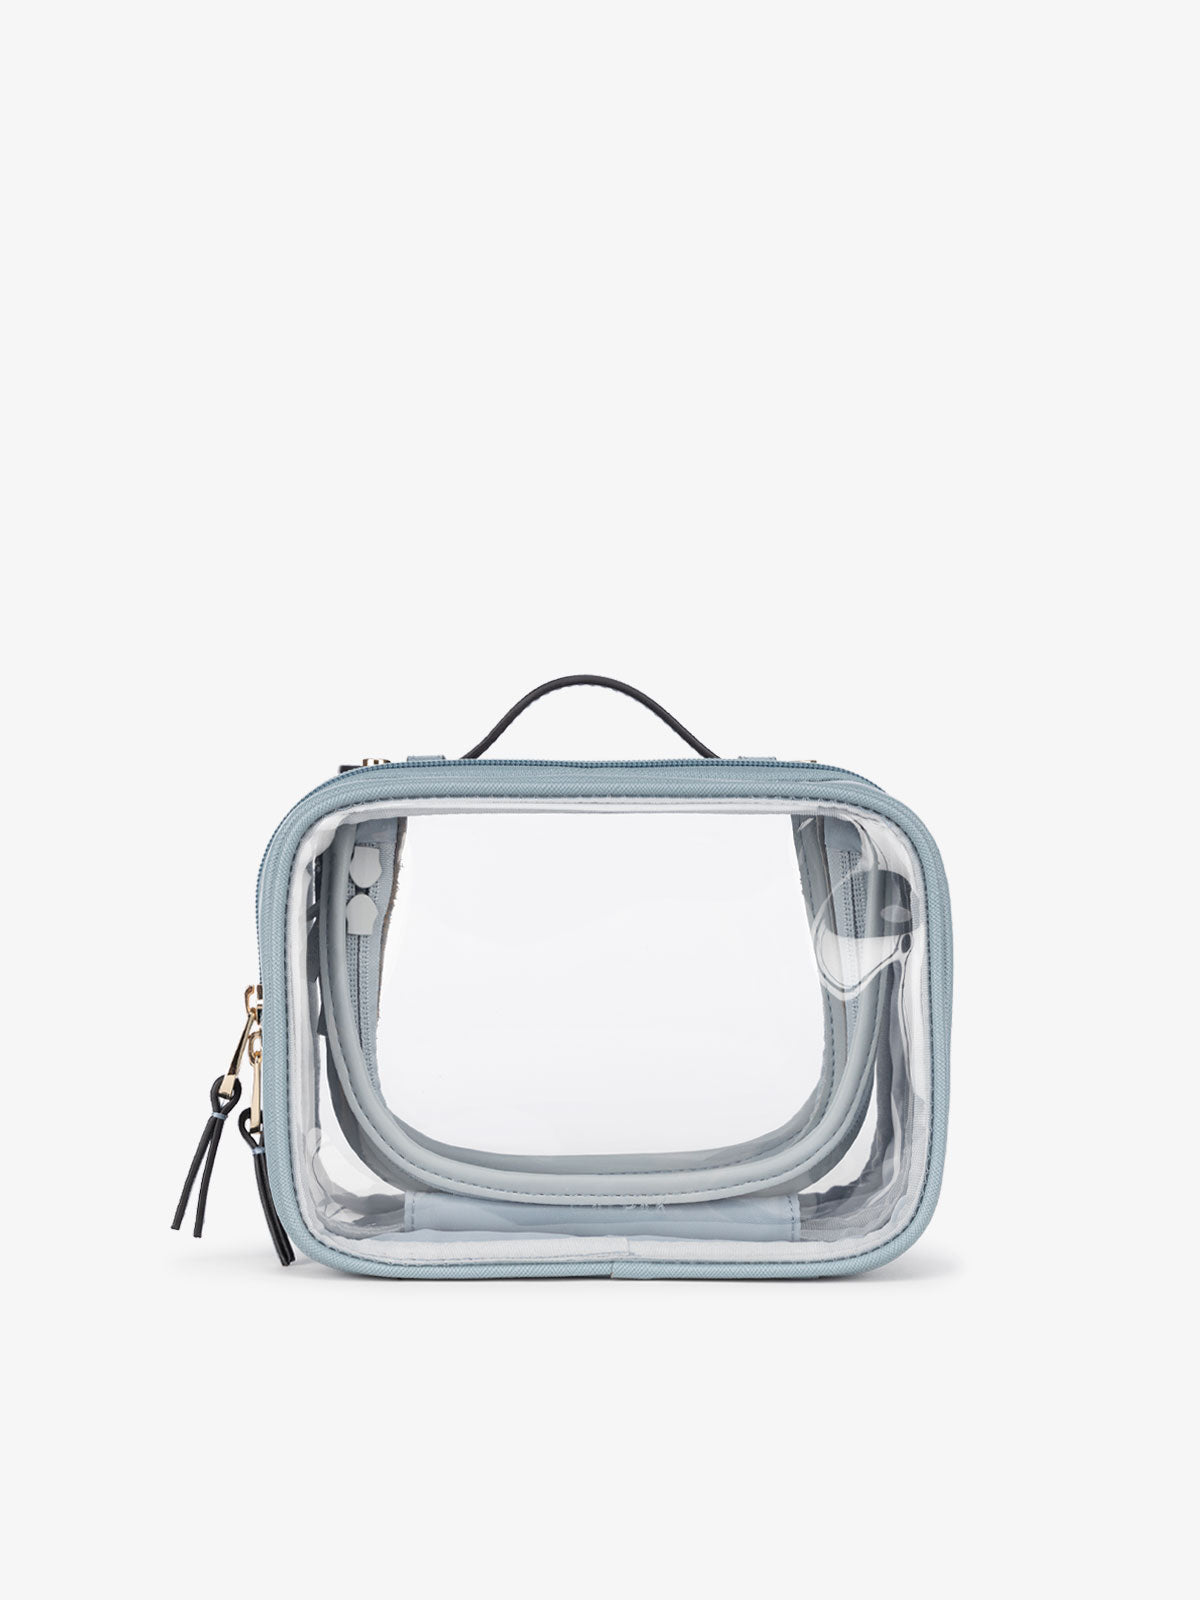 CALPAK small clear cosmetic case with handle in blue